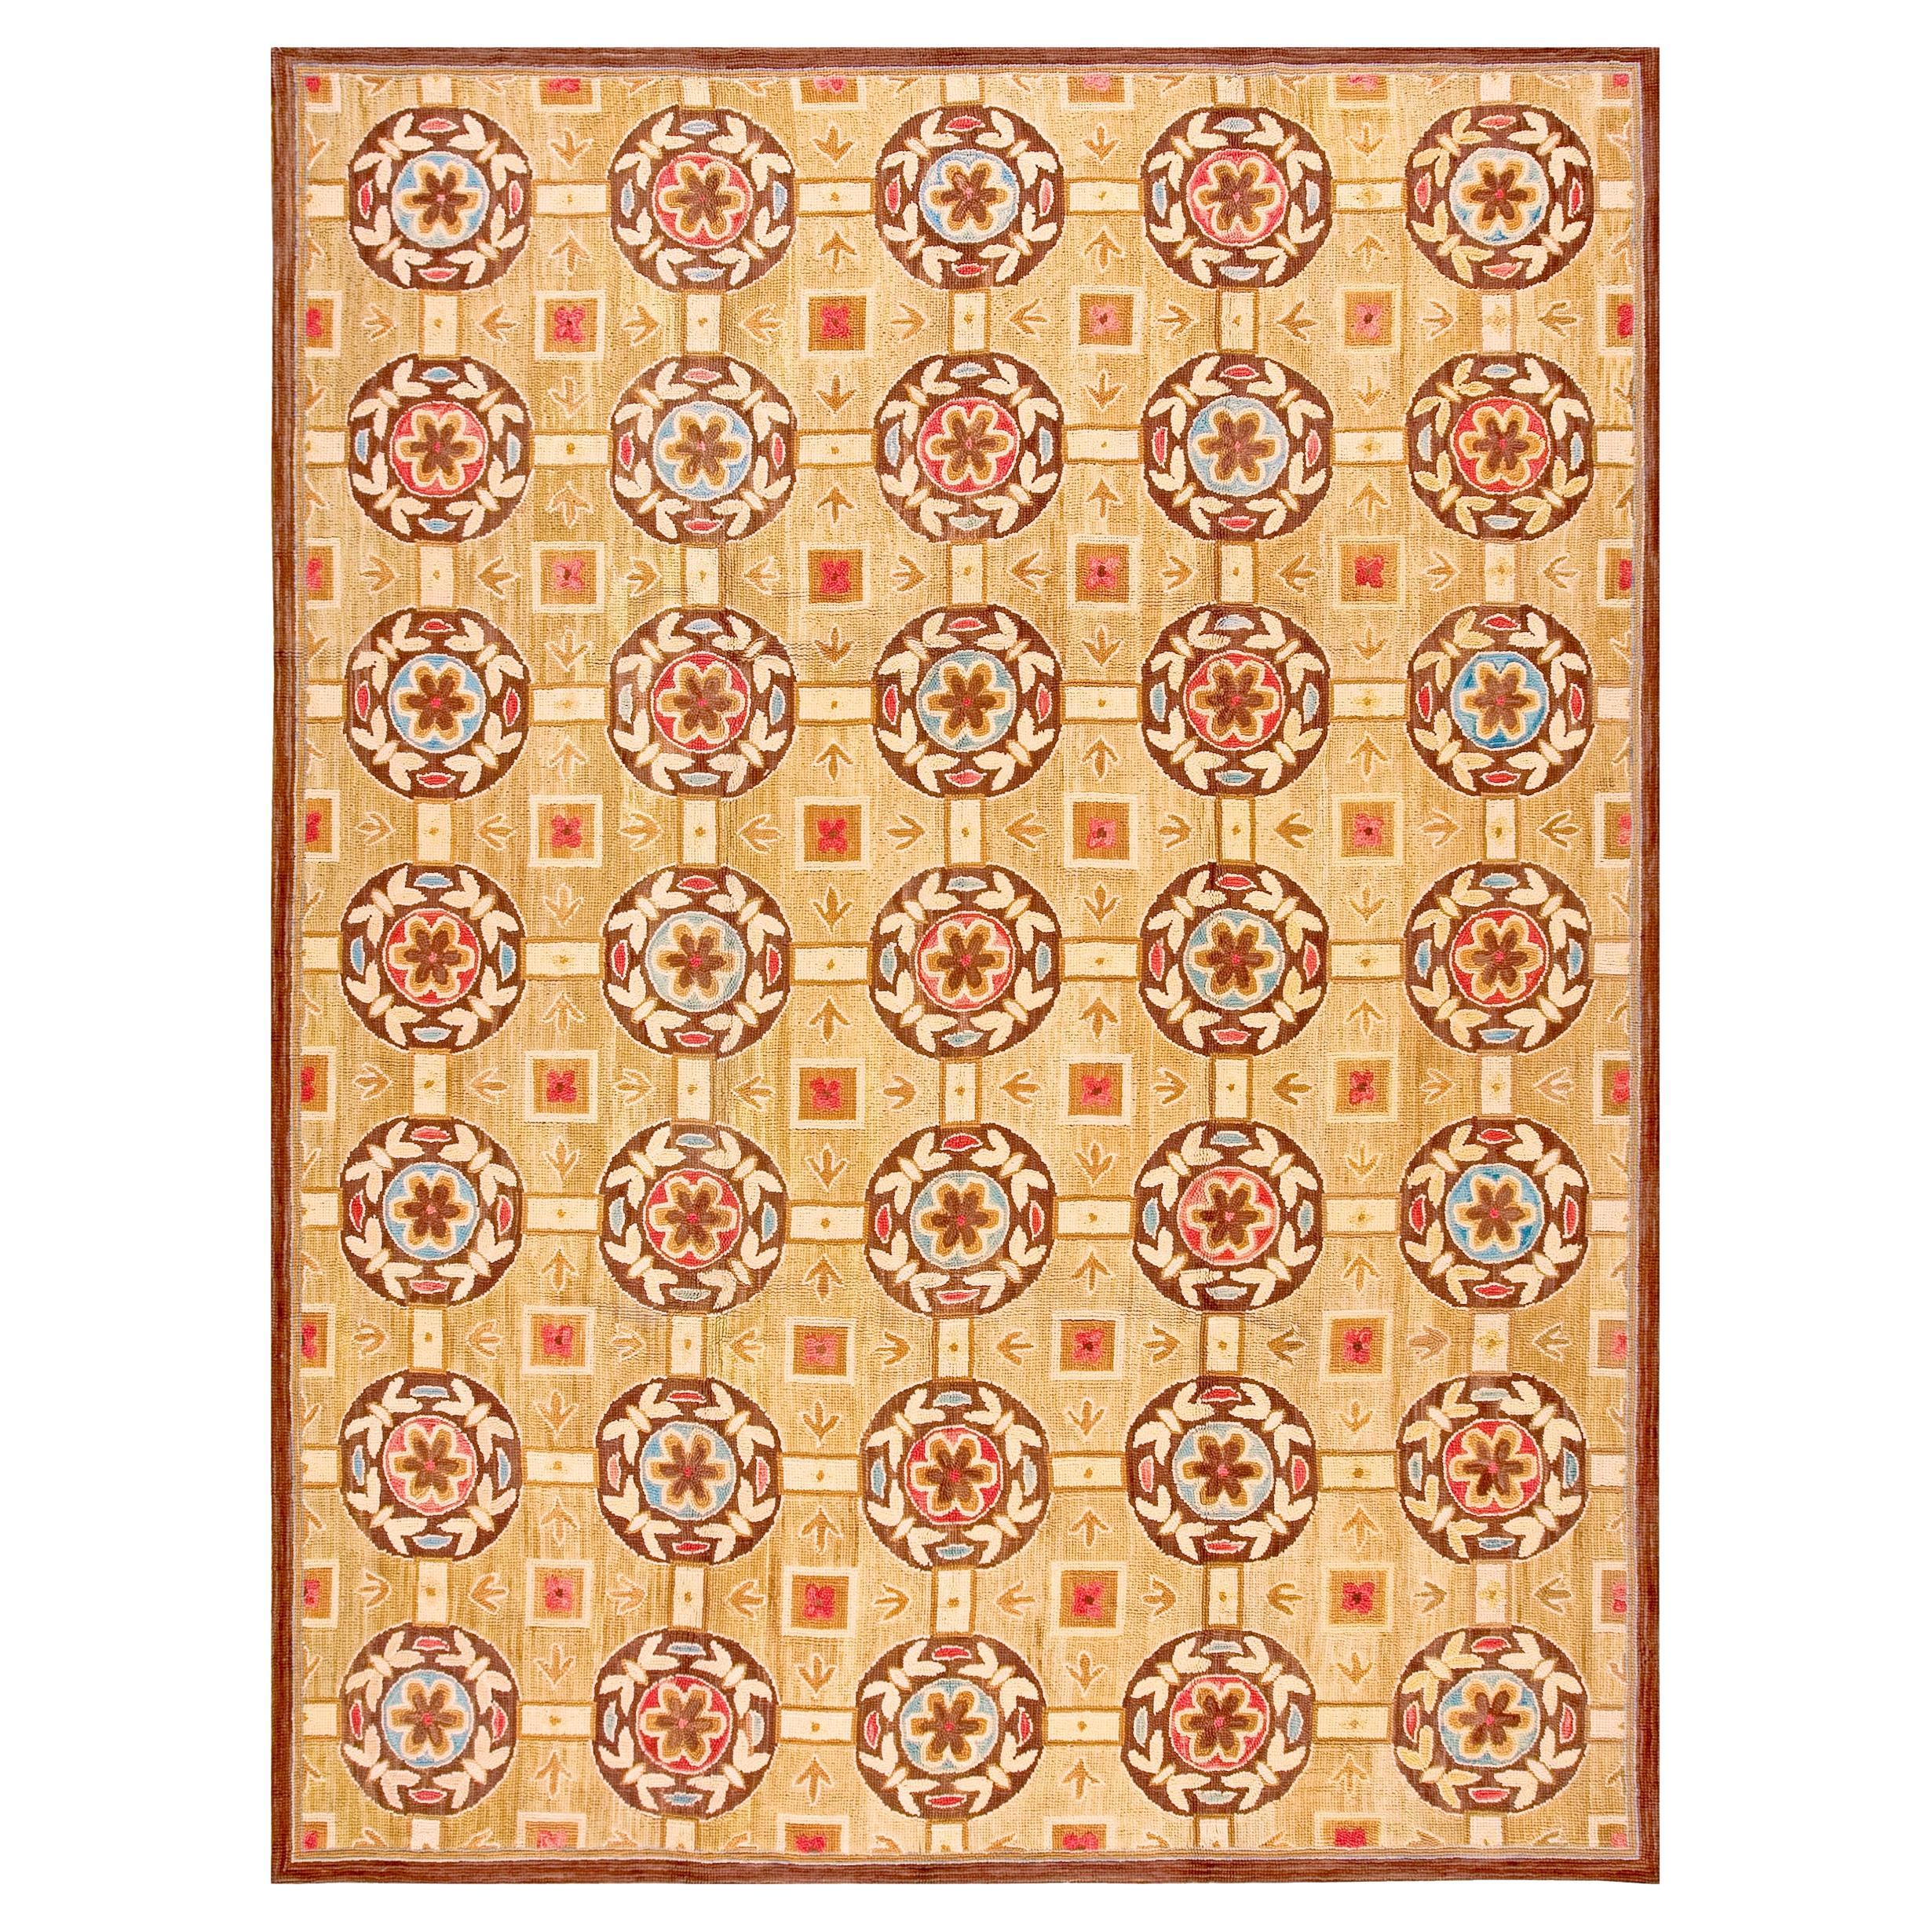 Contemporary Wool Hooked Rug ( 9' x 12' x 275 x 365 ) im Angebot